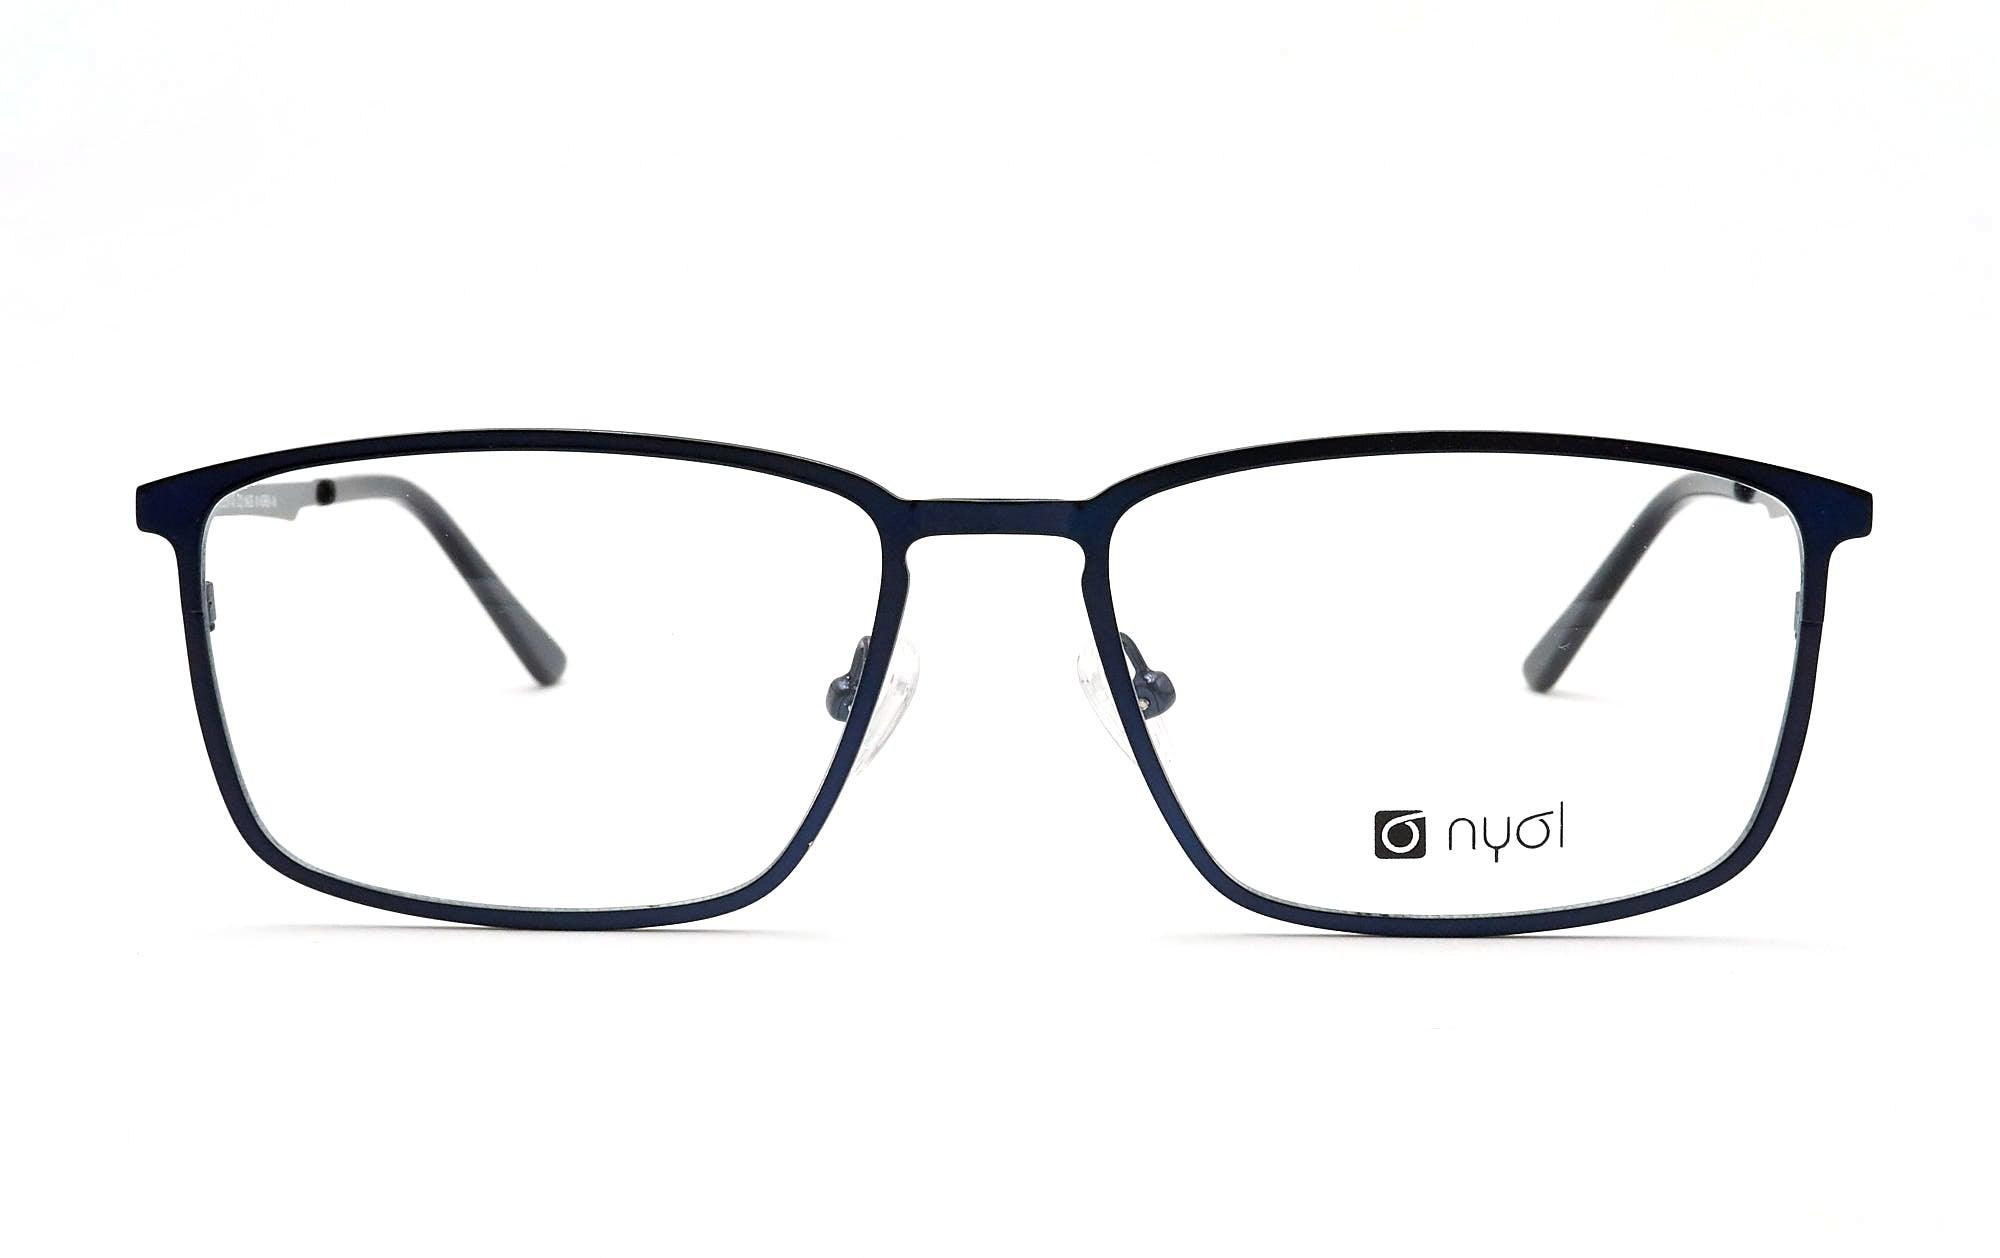 NYOL 1906 03 - Opticas Lookout